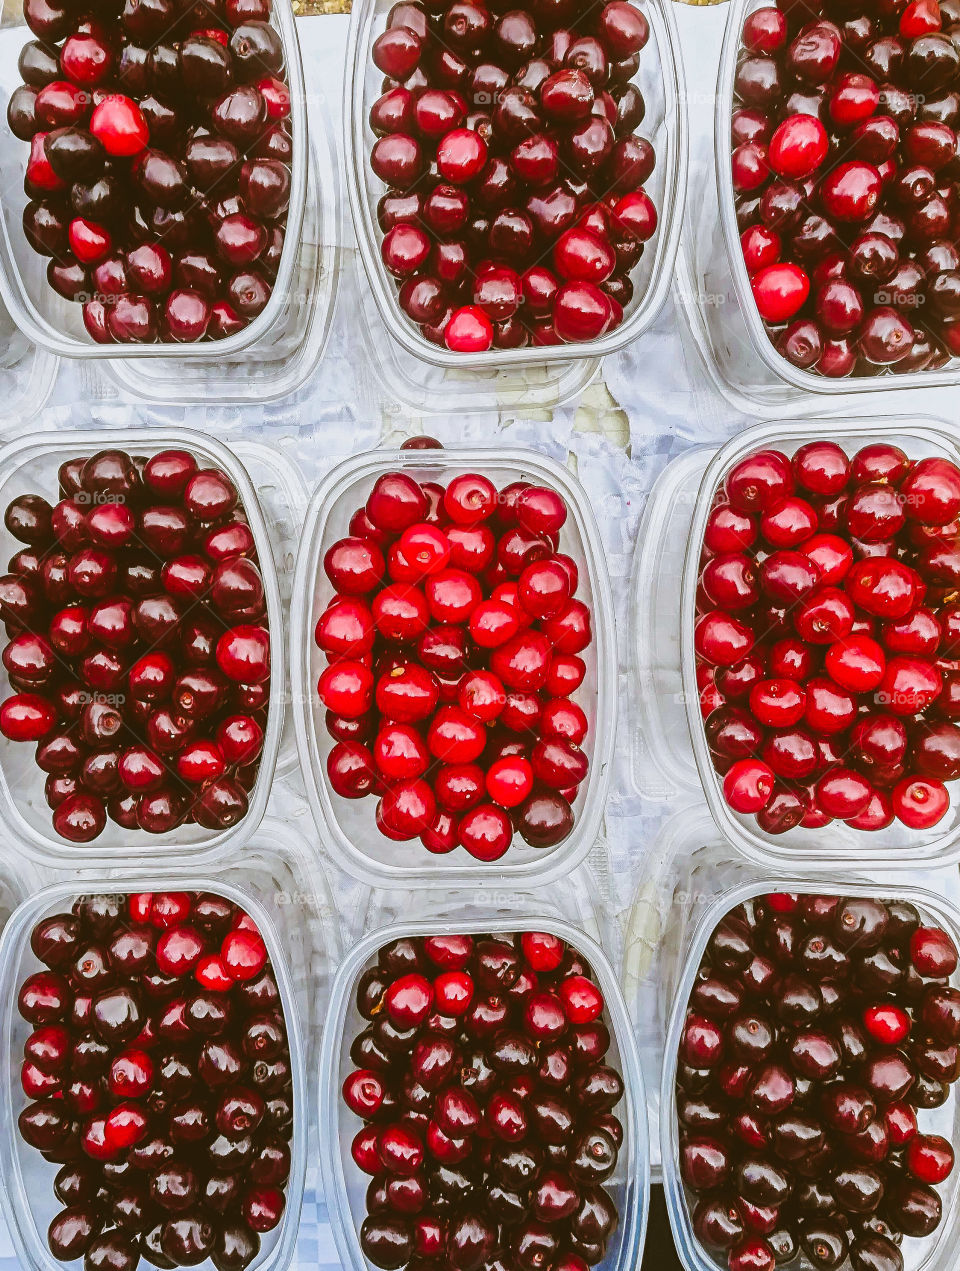 Sweet Red cherries in the plastic trays.